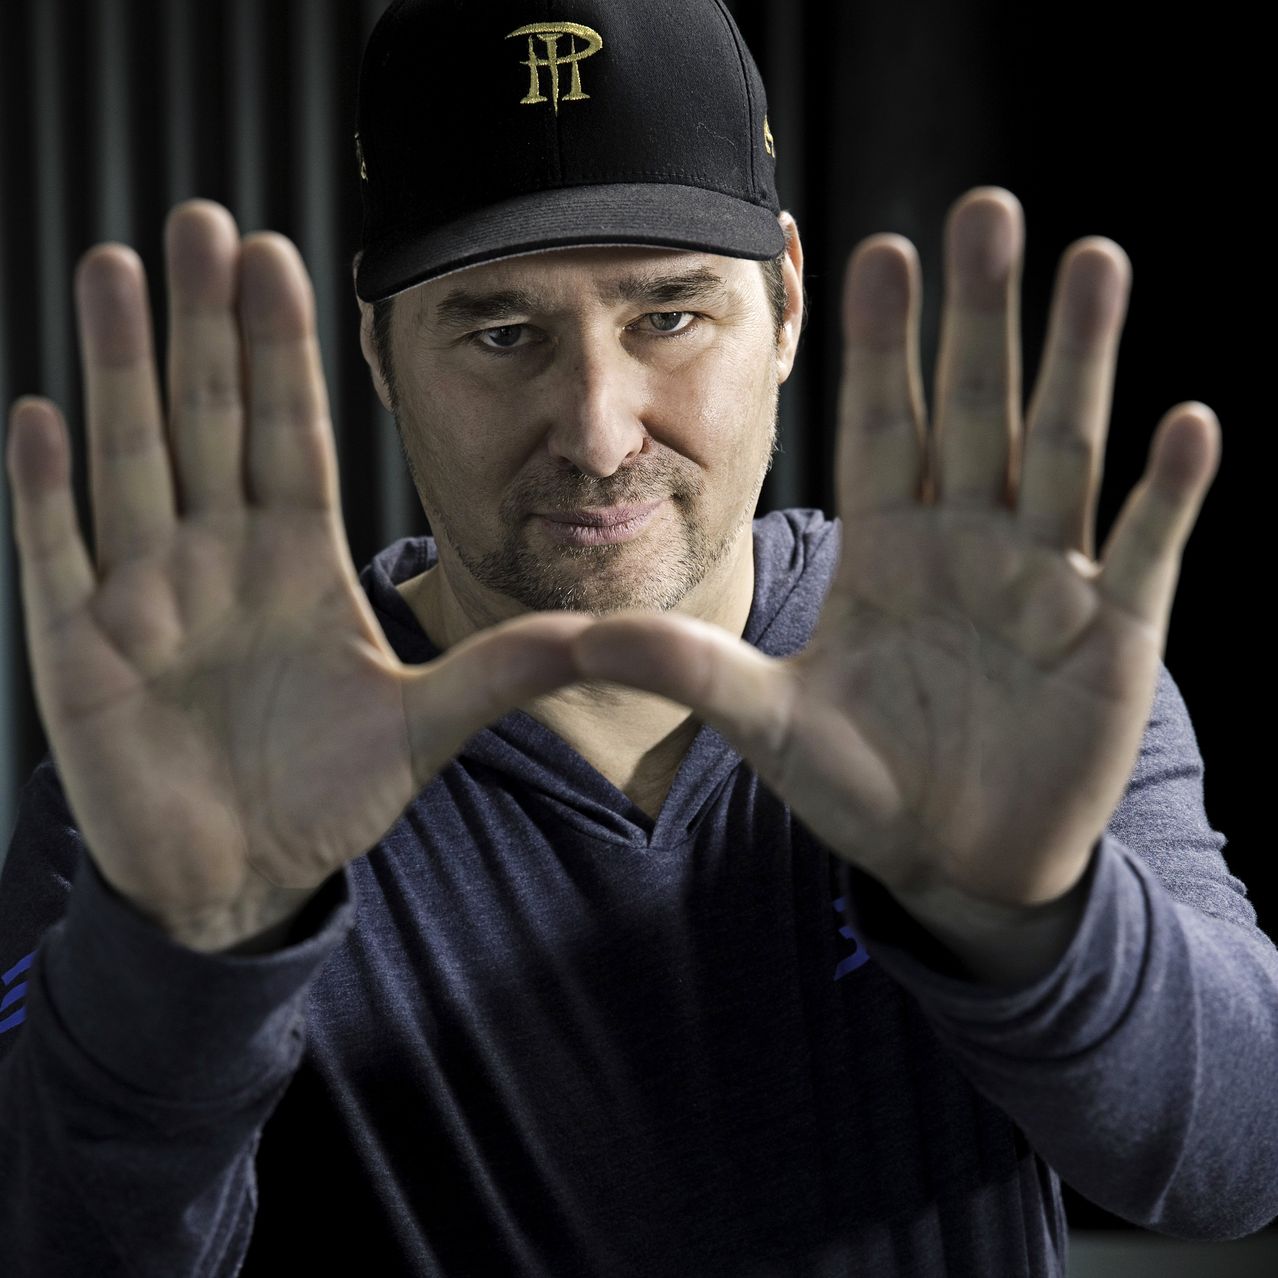 Phil Hellmuth prop bet